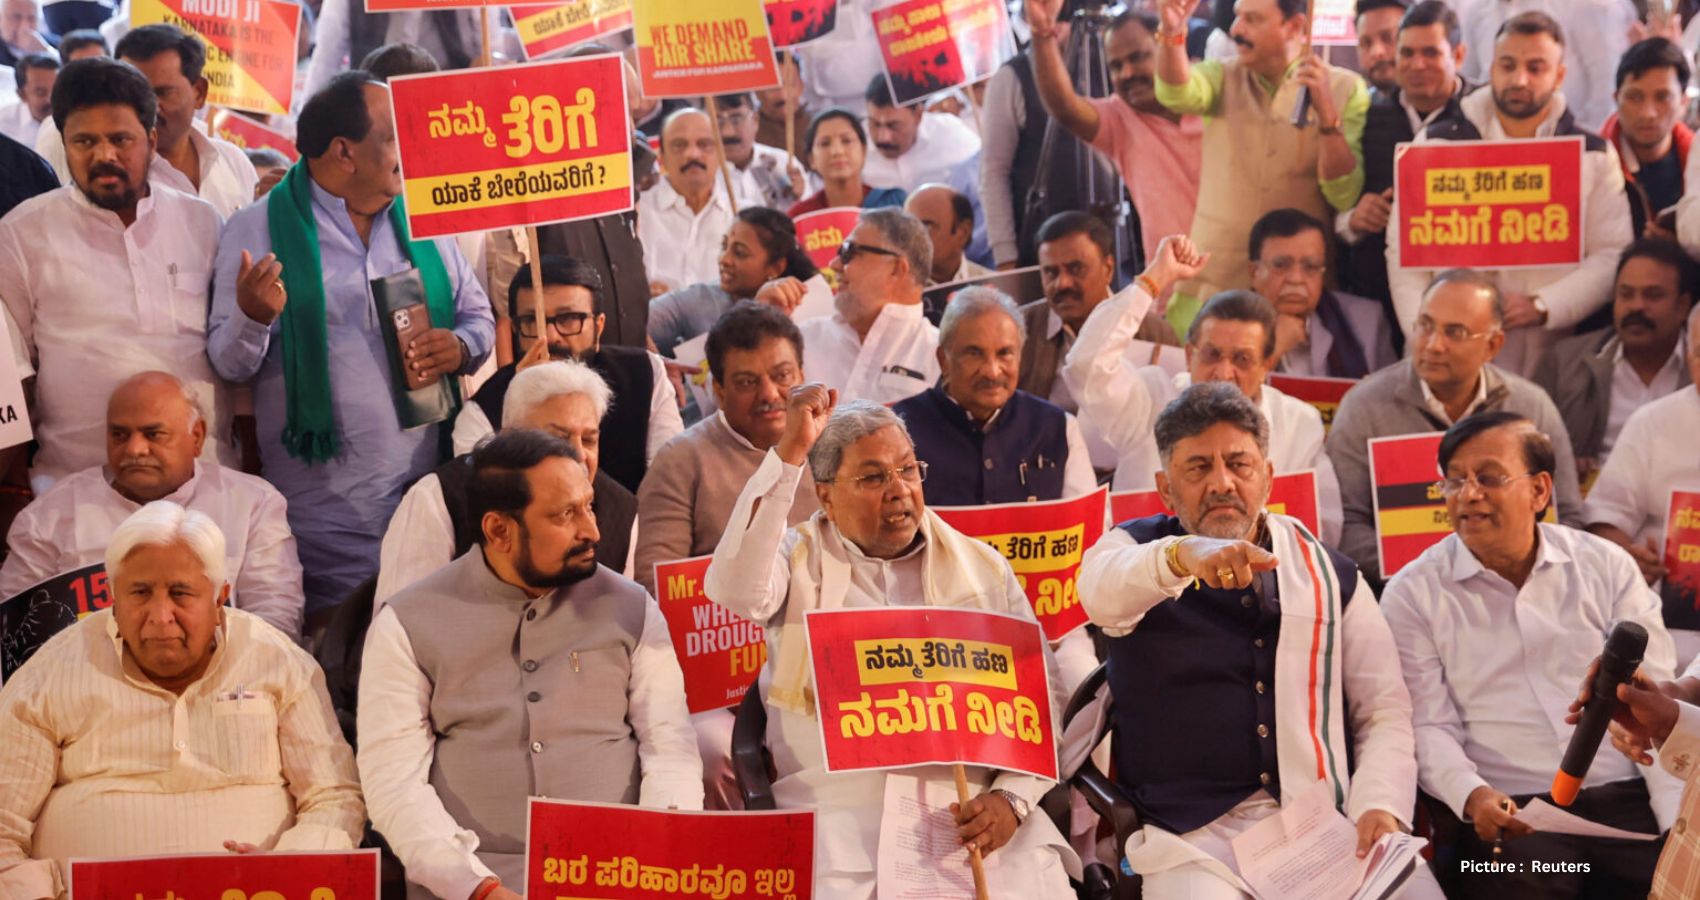 Southern Indian States Protest Alleged Fiscal Discrimination in New Delhi